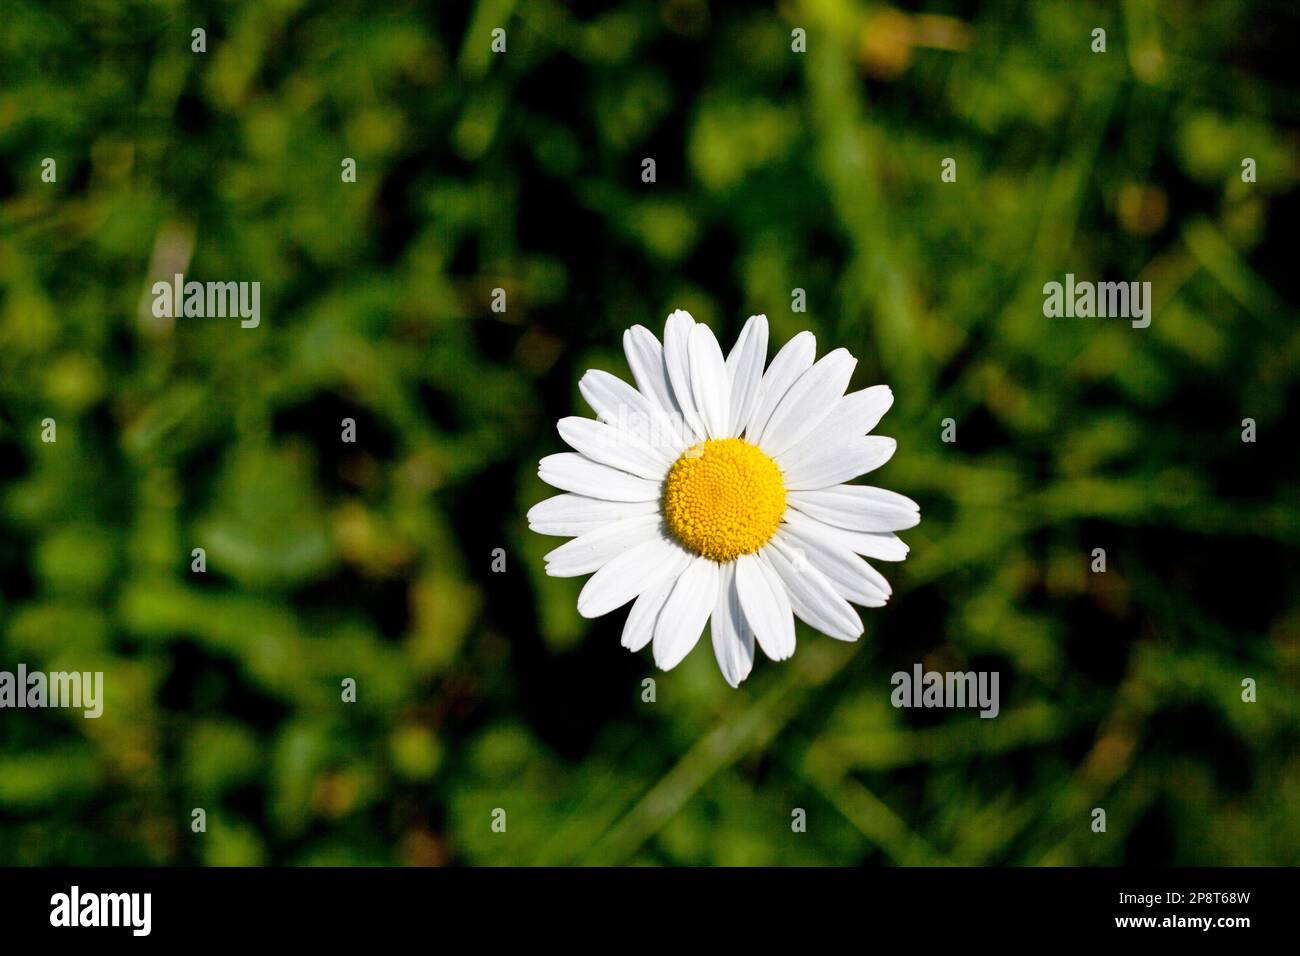 A single daisy growing in a field of green Stock Photo